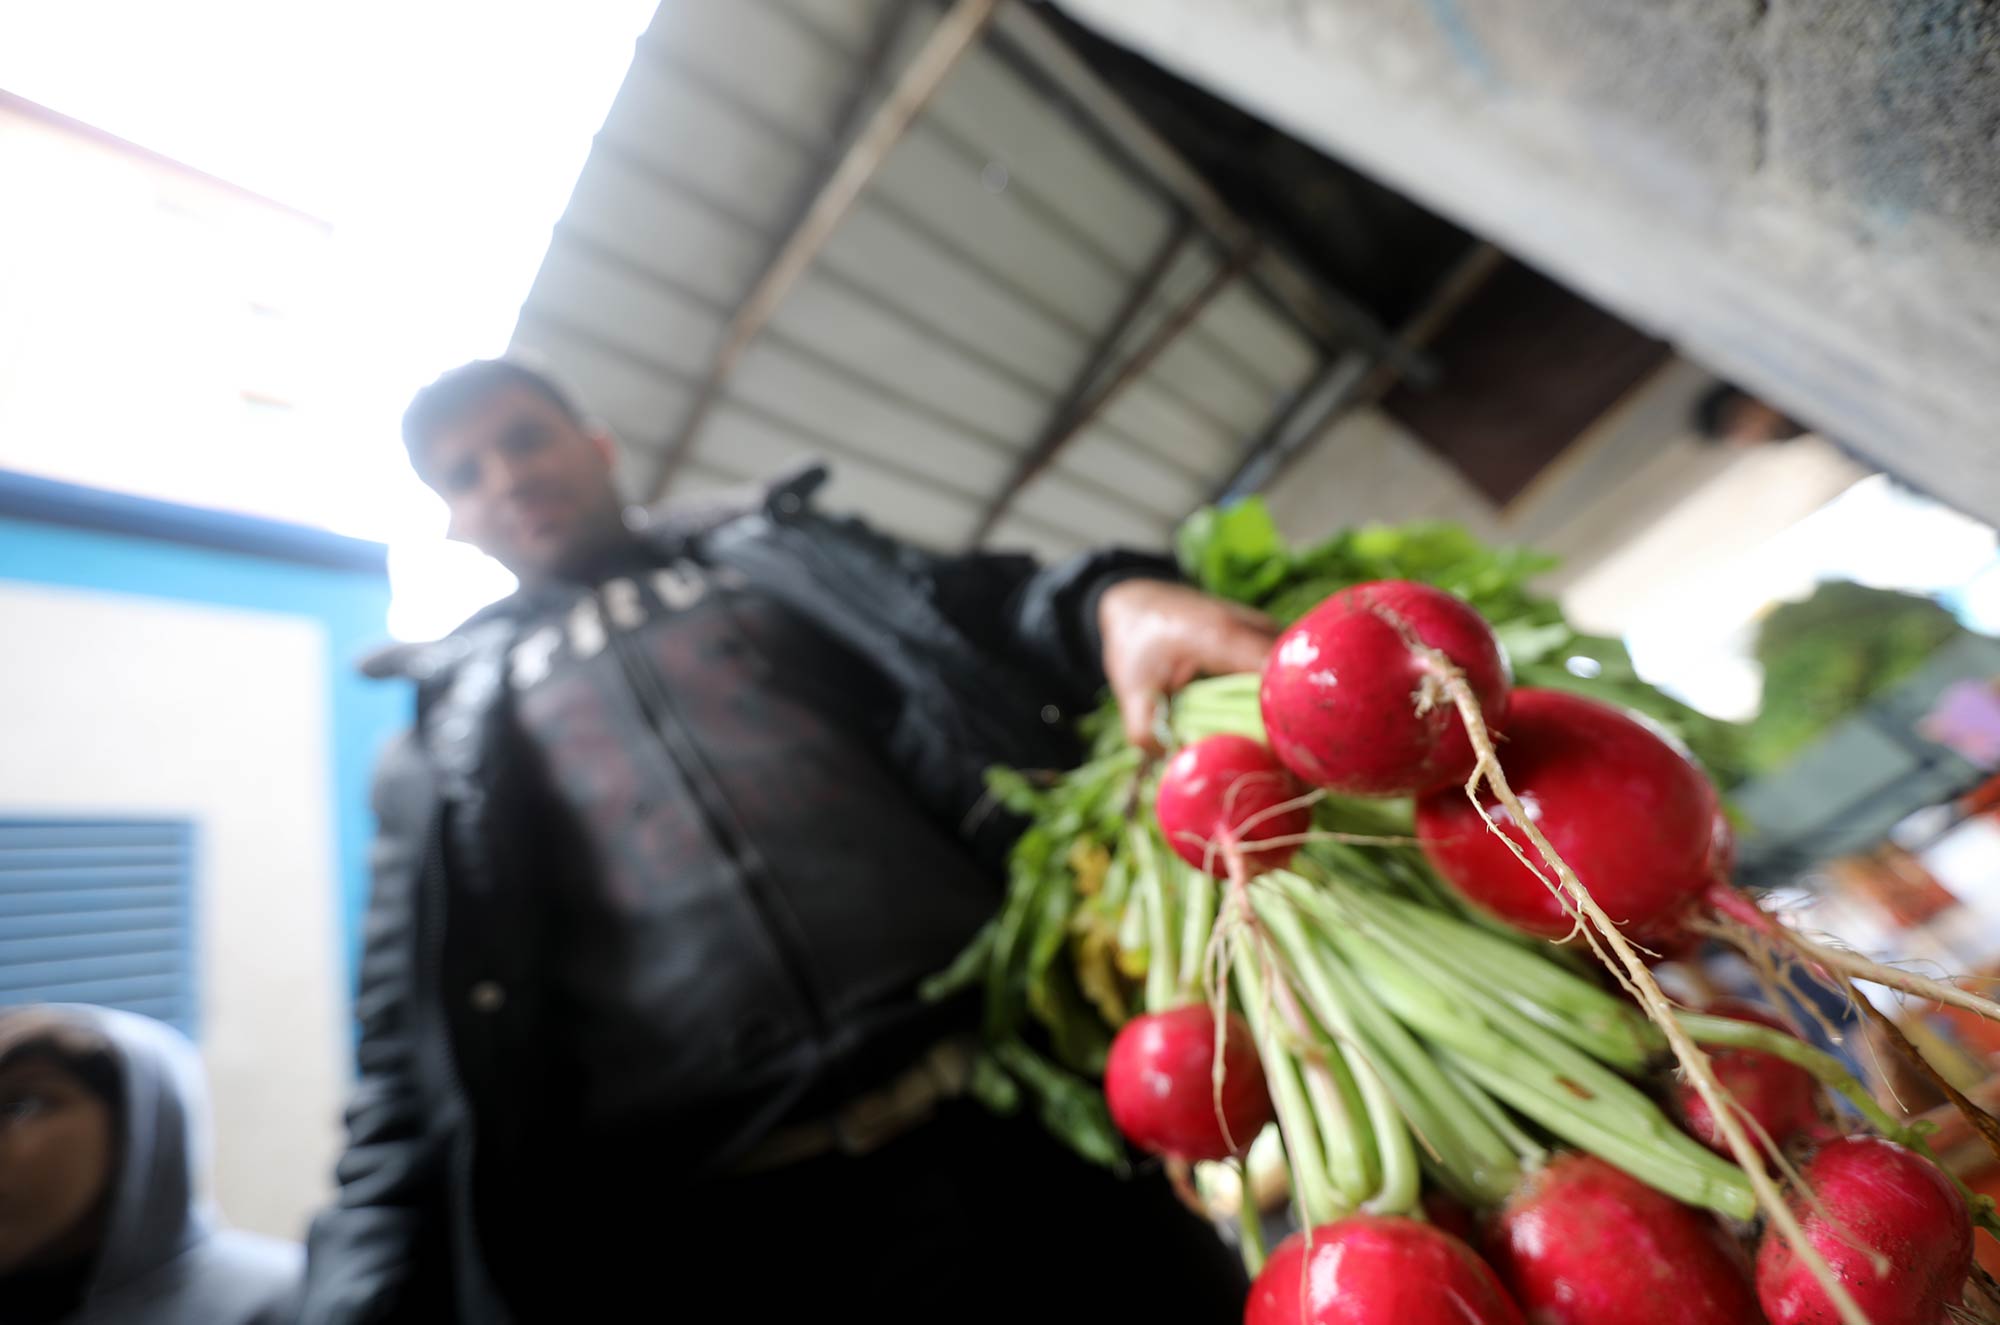 A merchant with his freshly washed Spanish radishes in front of the Anera-renovated water well pump facility in Jabalia refugee camp, Gaza.